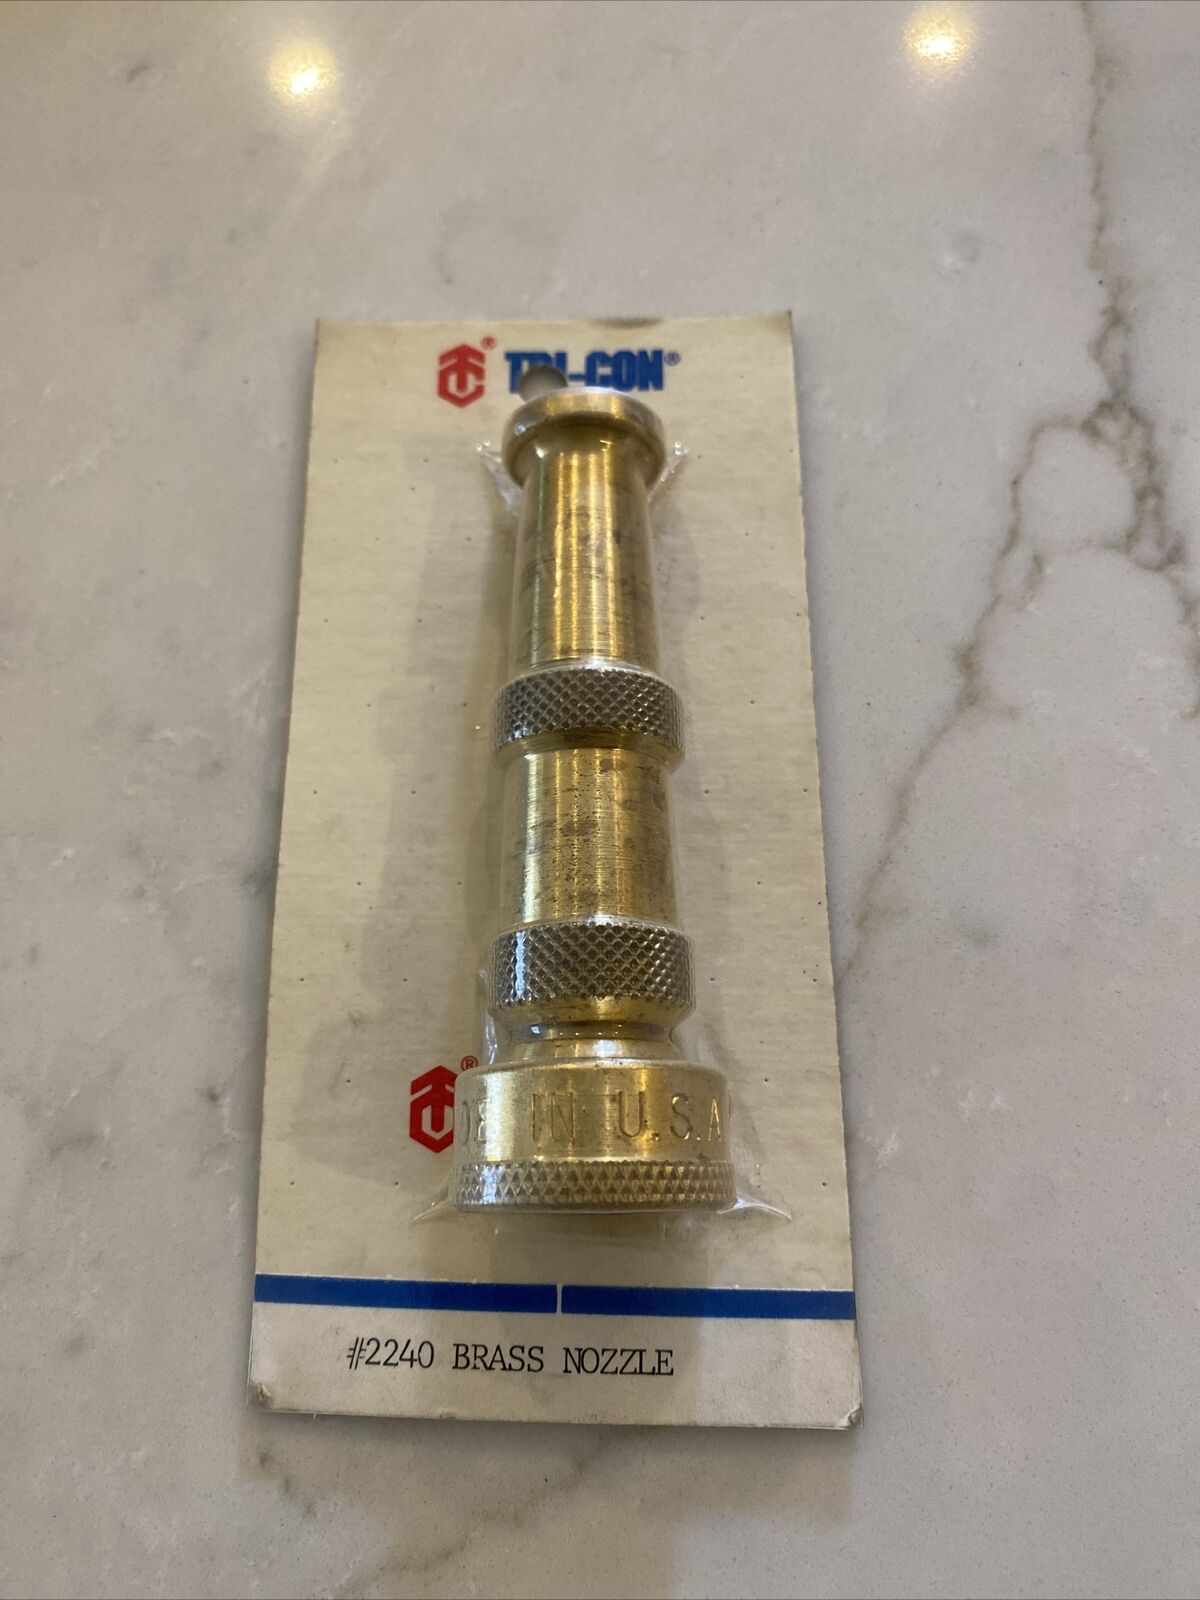 VINTAGE TRI-CON BRASS HOSE NOZZLE,#2240,”ONLY ONE’S FOR SALE ON INTERNET “RARE